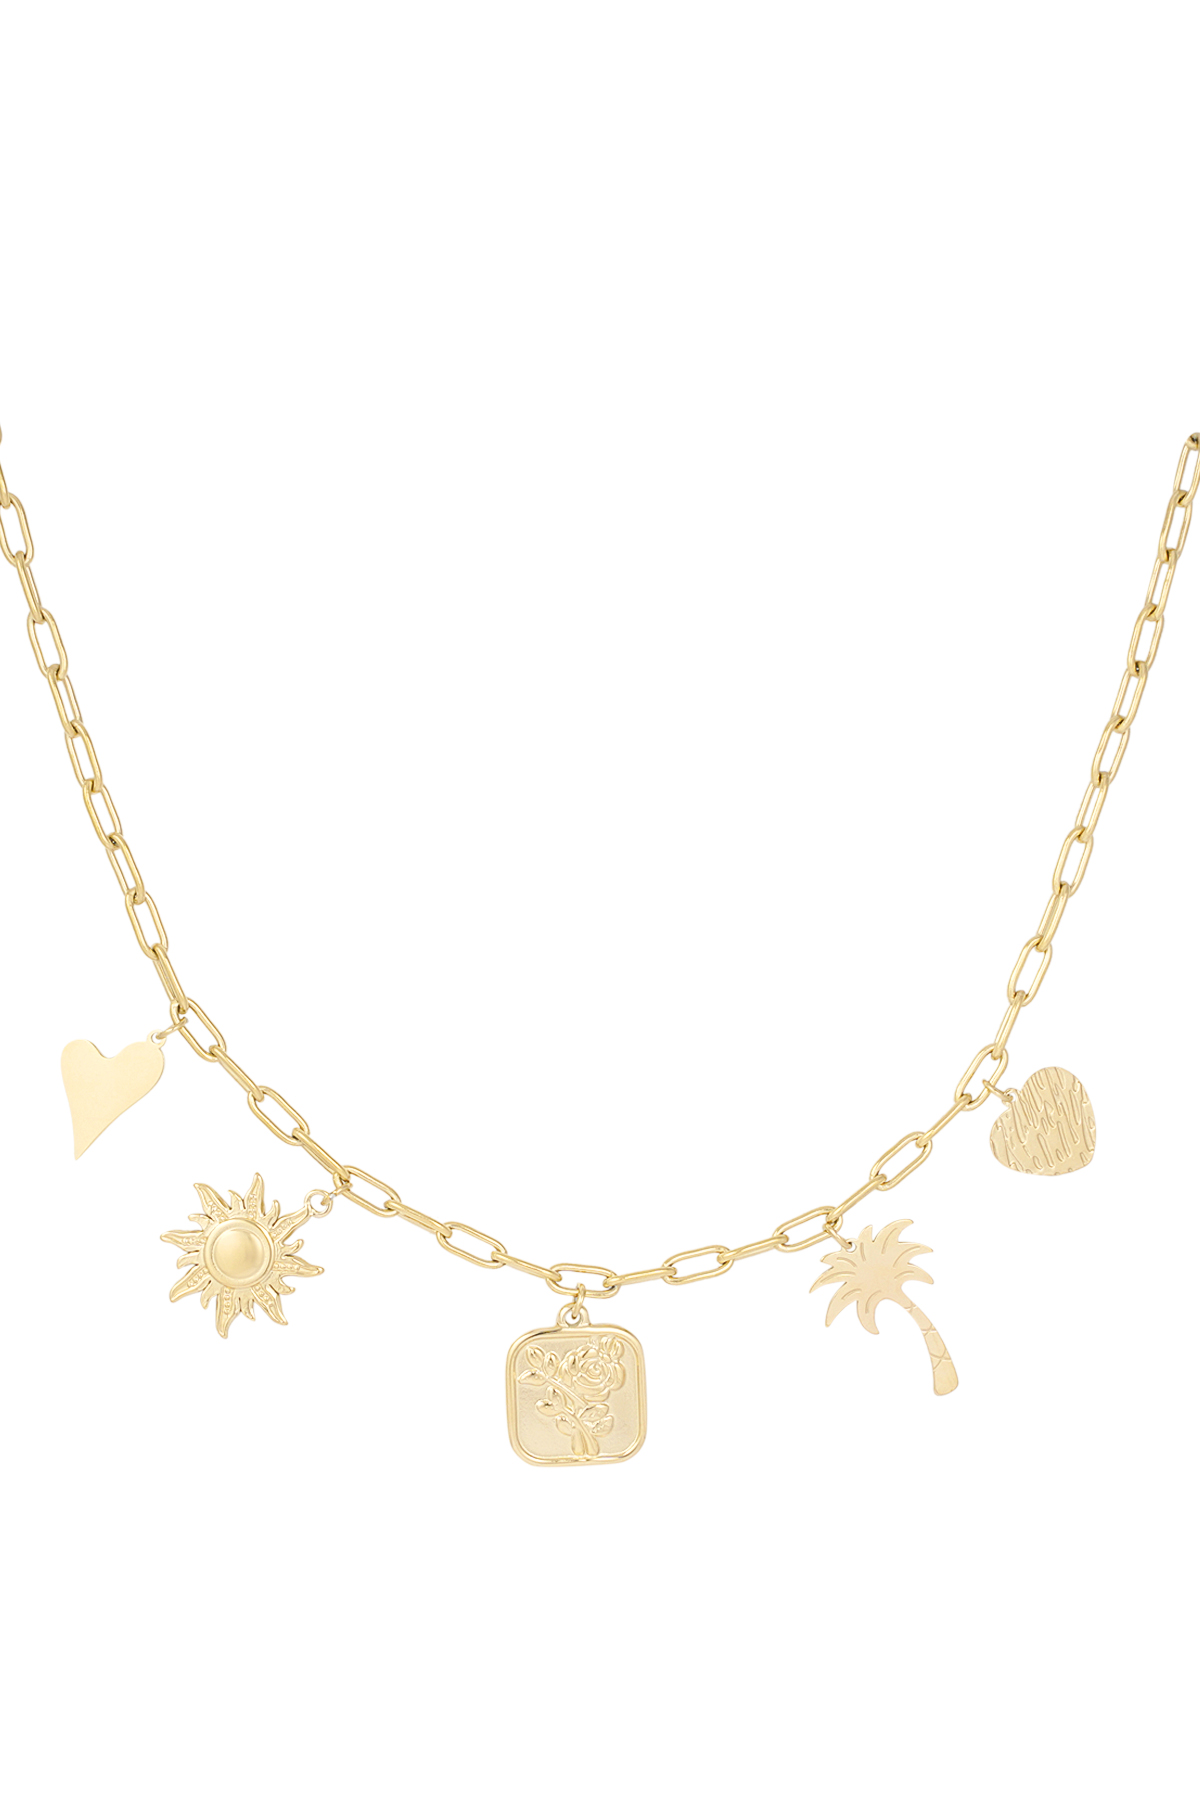 Charm necklace palm possession - gold